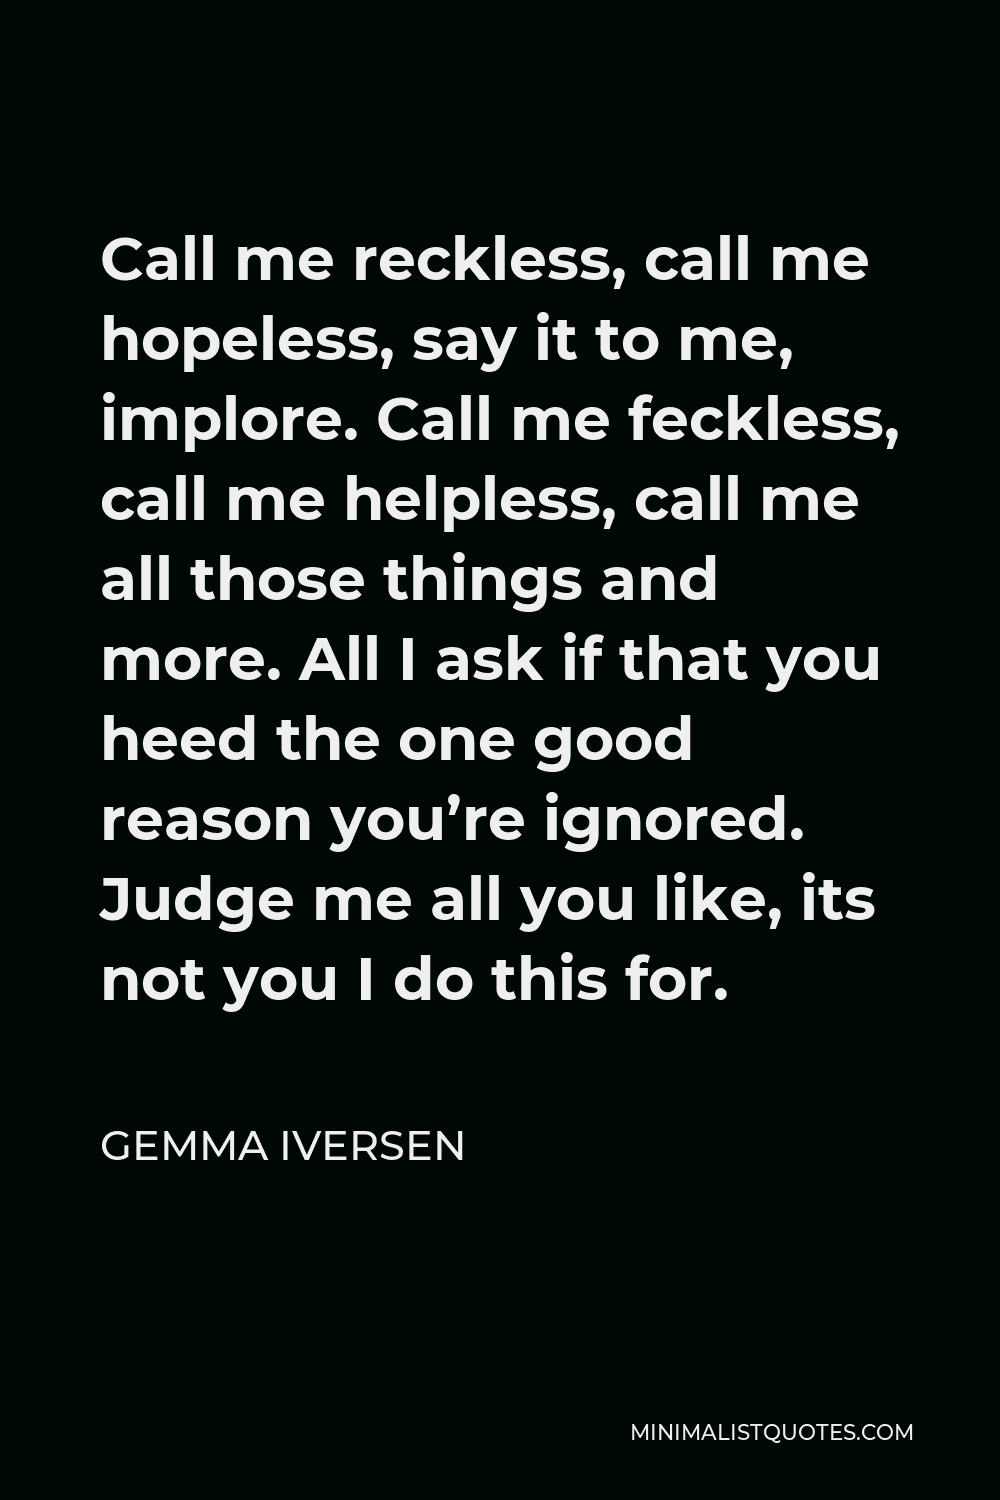 Gemma Iversen Quote - Call me reckless, call me hopeless, say it to me, implore. Call me feckless, call me helpless, call me all those things and more. All I ask if that you heed the one good reason you’re ignored. Judge me all you like, its not you I do this for.